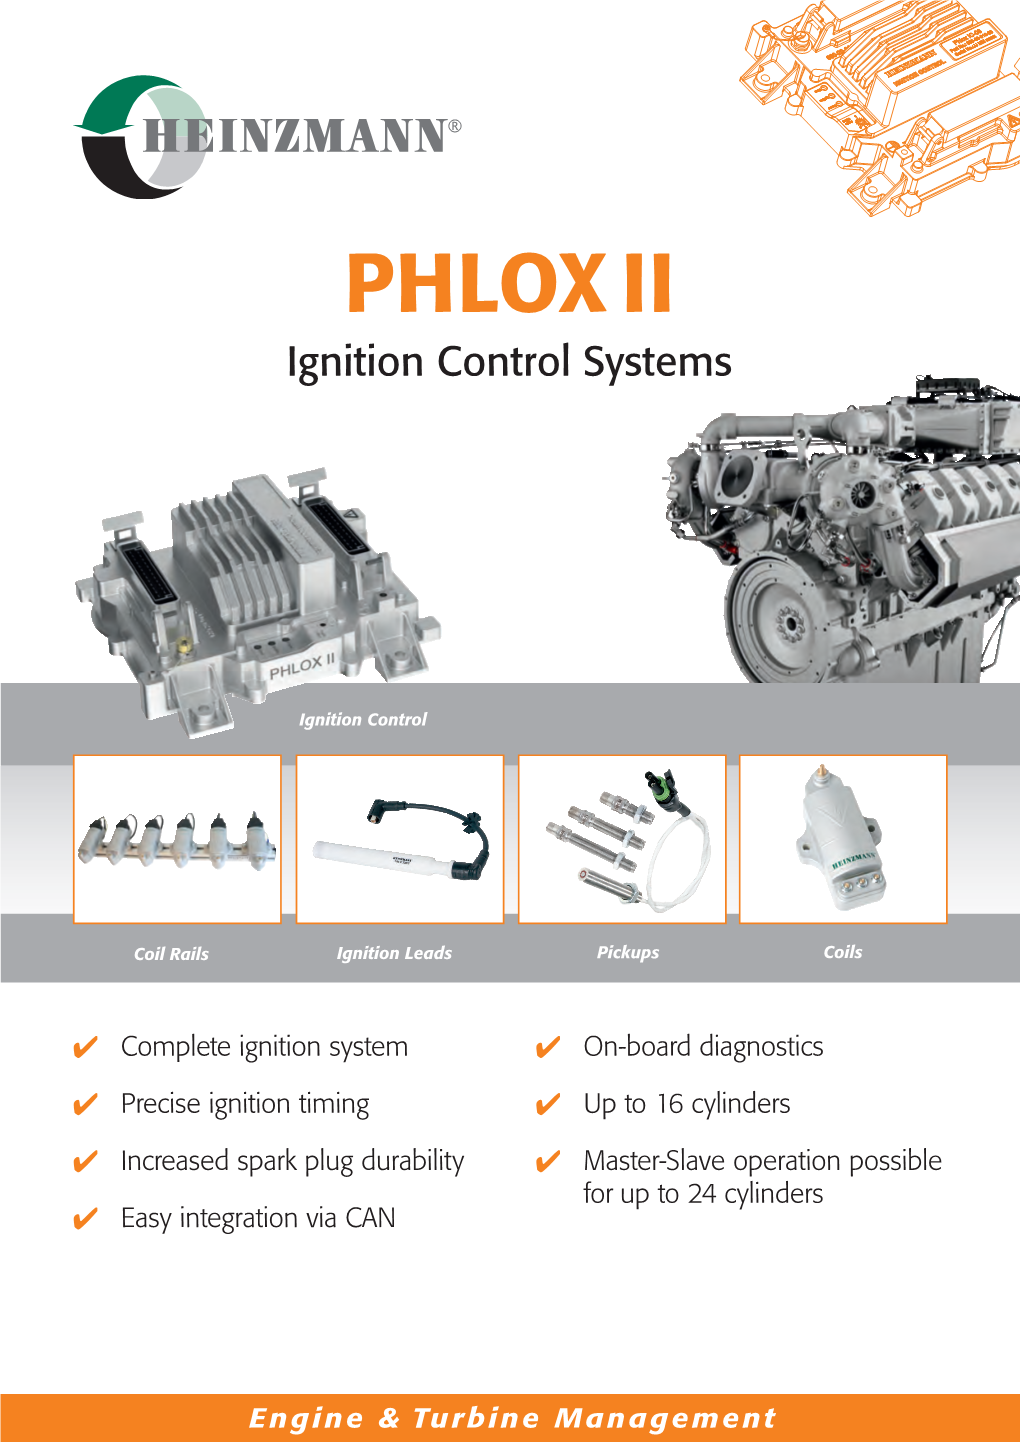 Ignition Control Systems